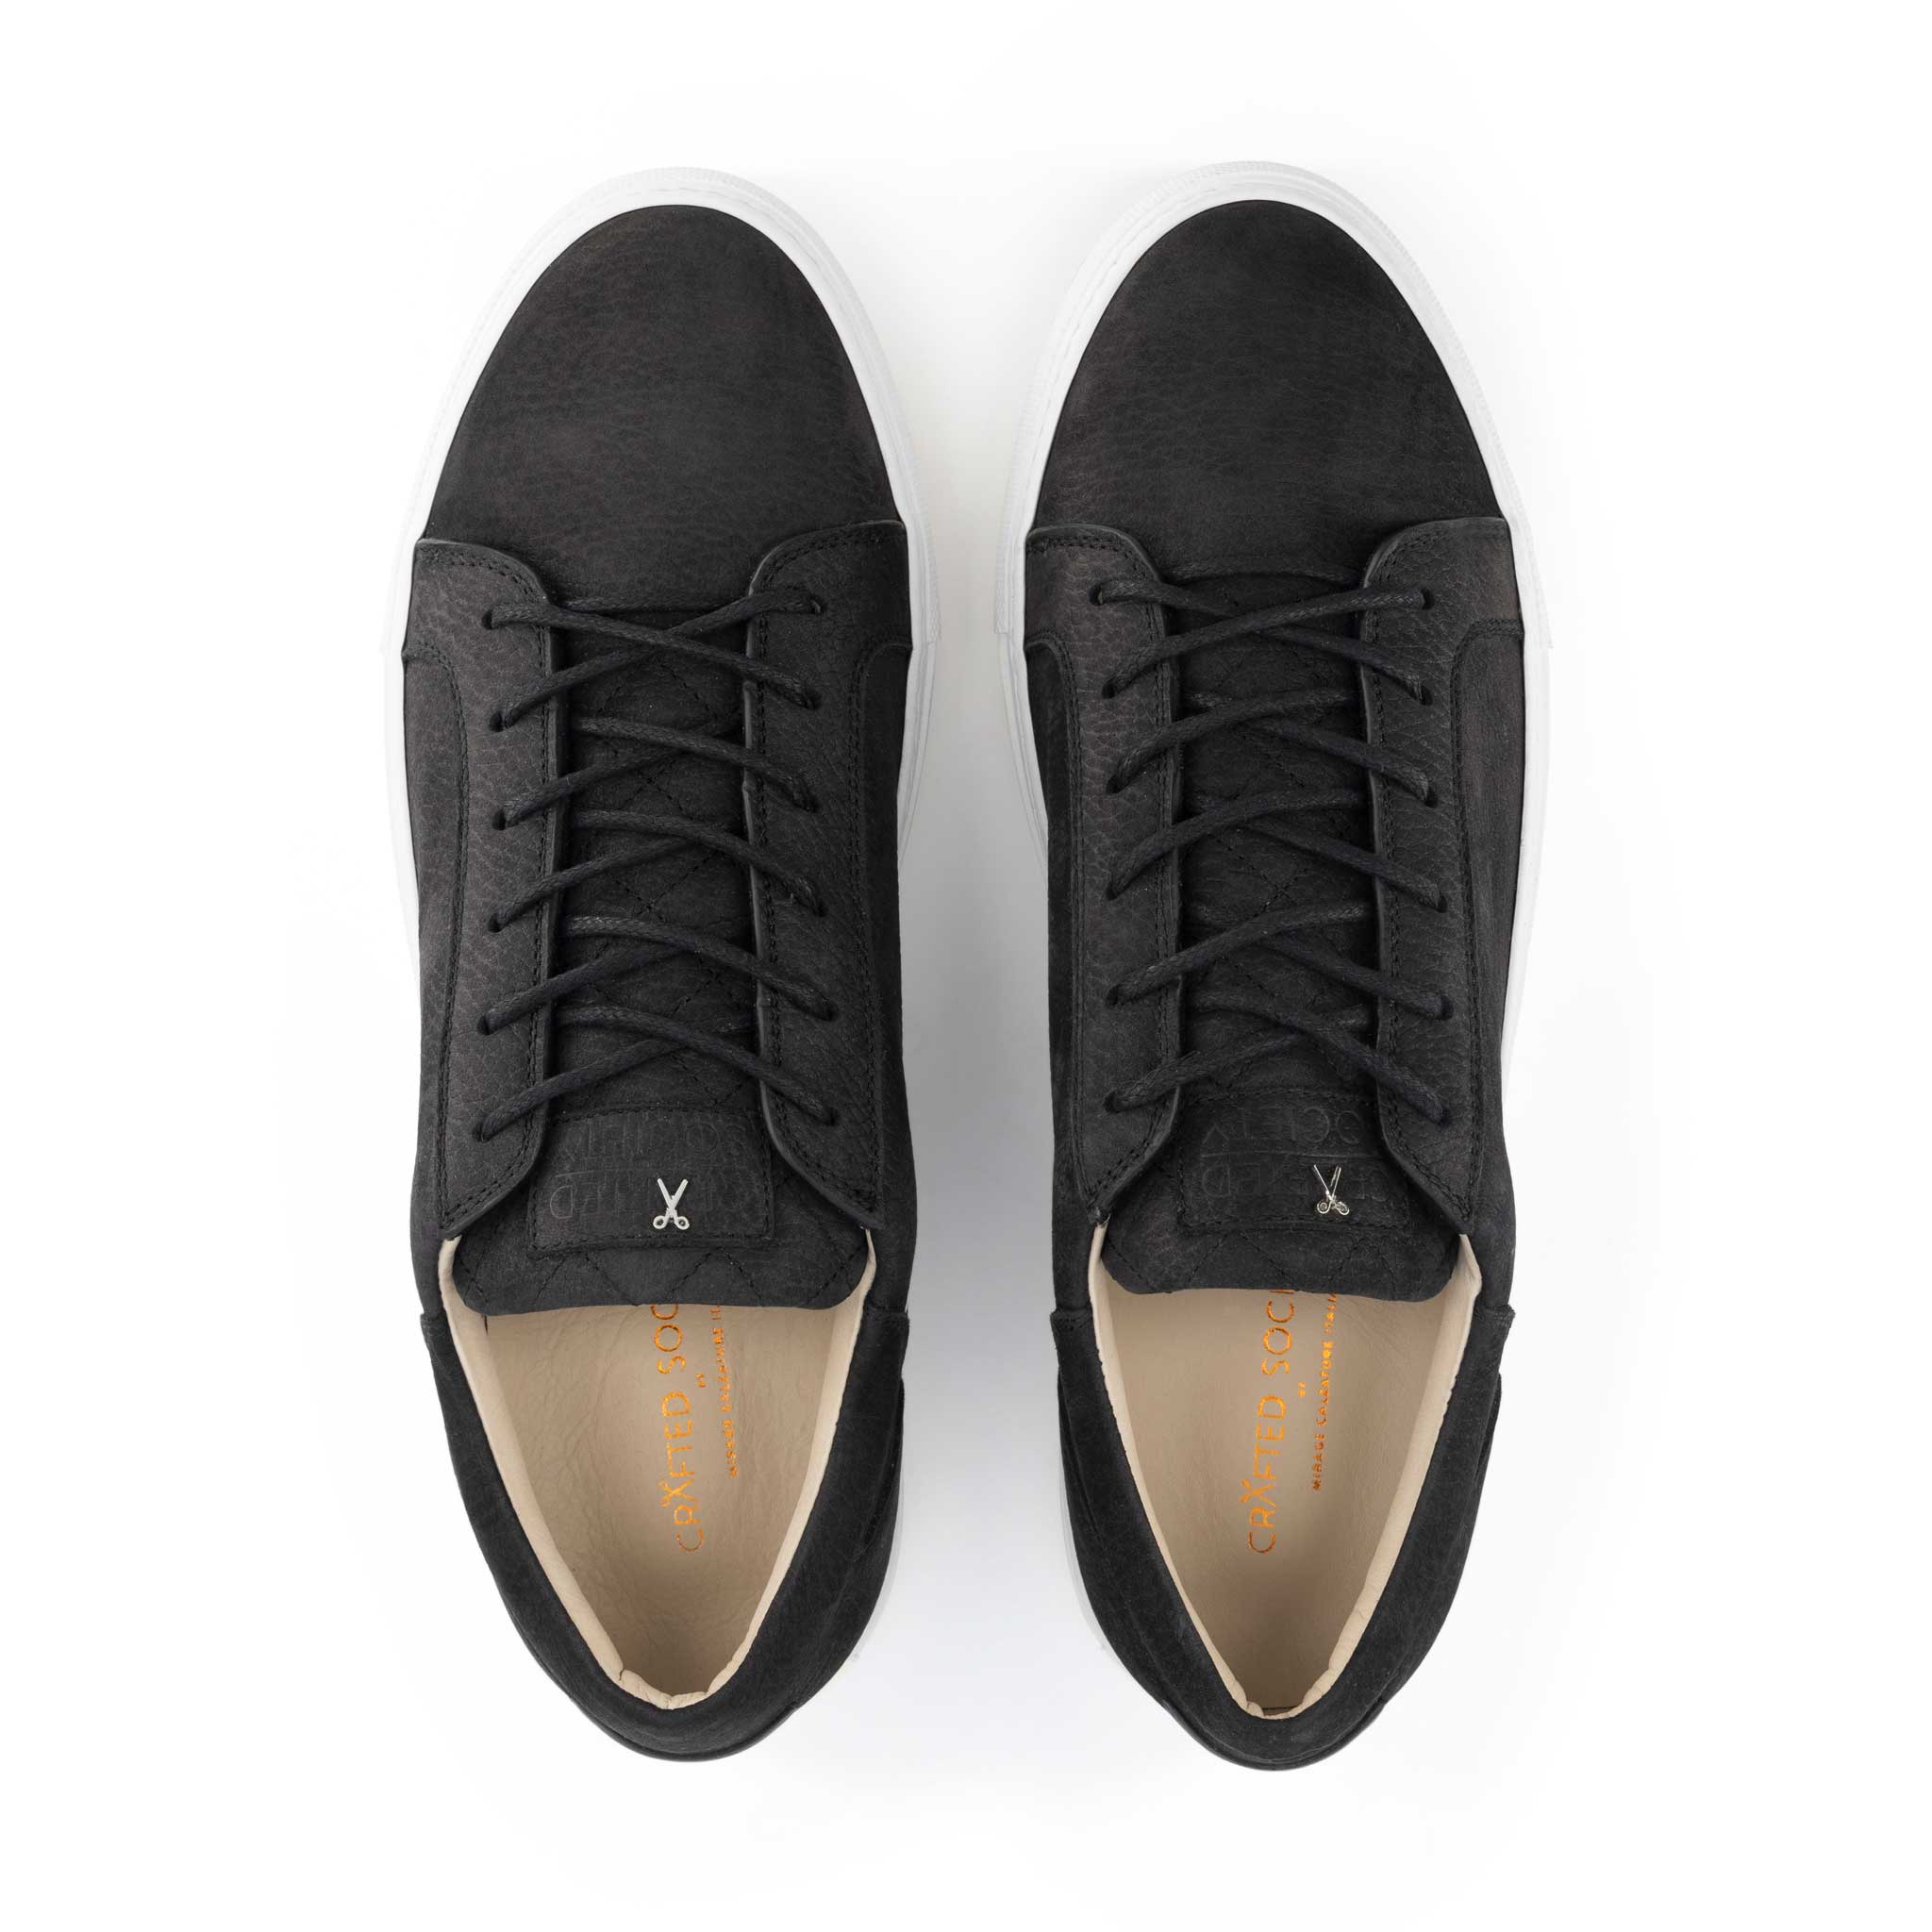 Italian leather sneaker in black nubuck leather with white outsole